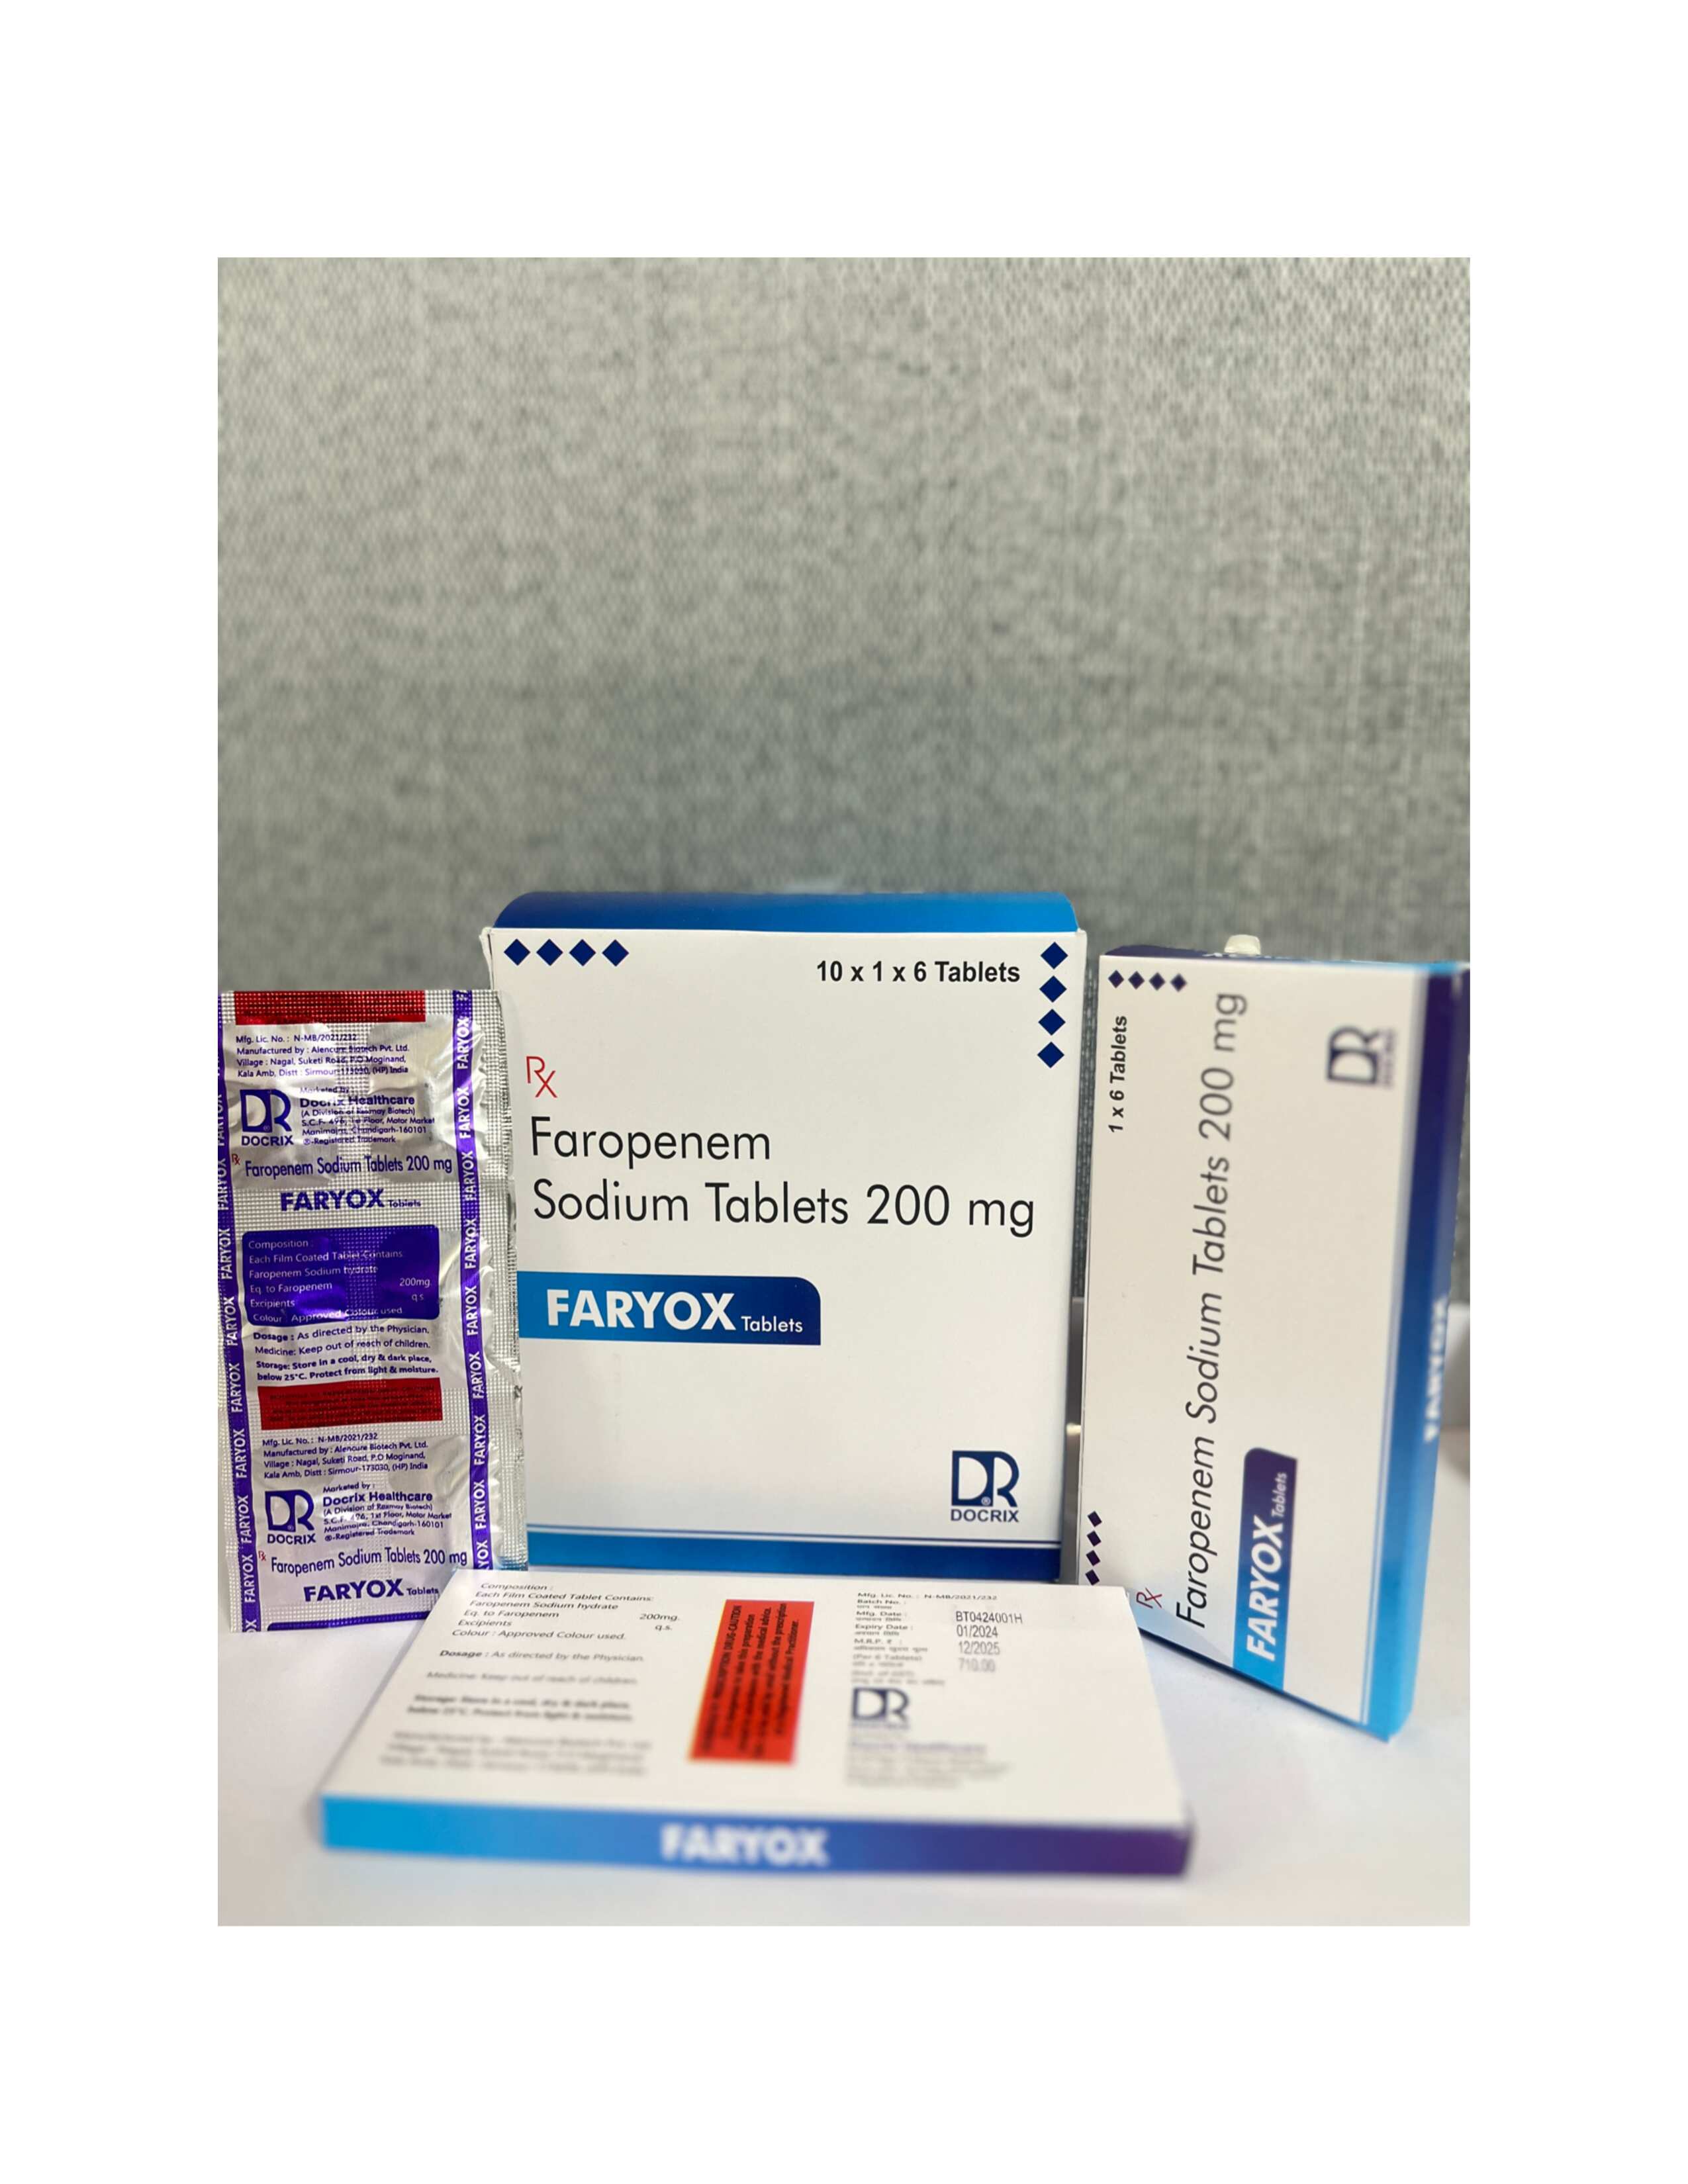 Product Name: Faryox , Compositions of Faryox  are Faropenem Sodium Tablets 200mg - Docrix Healthcare